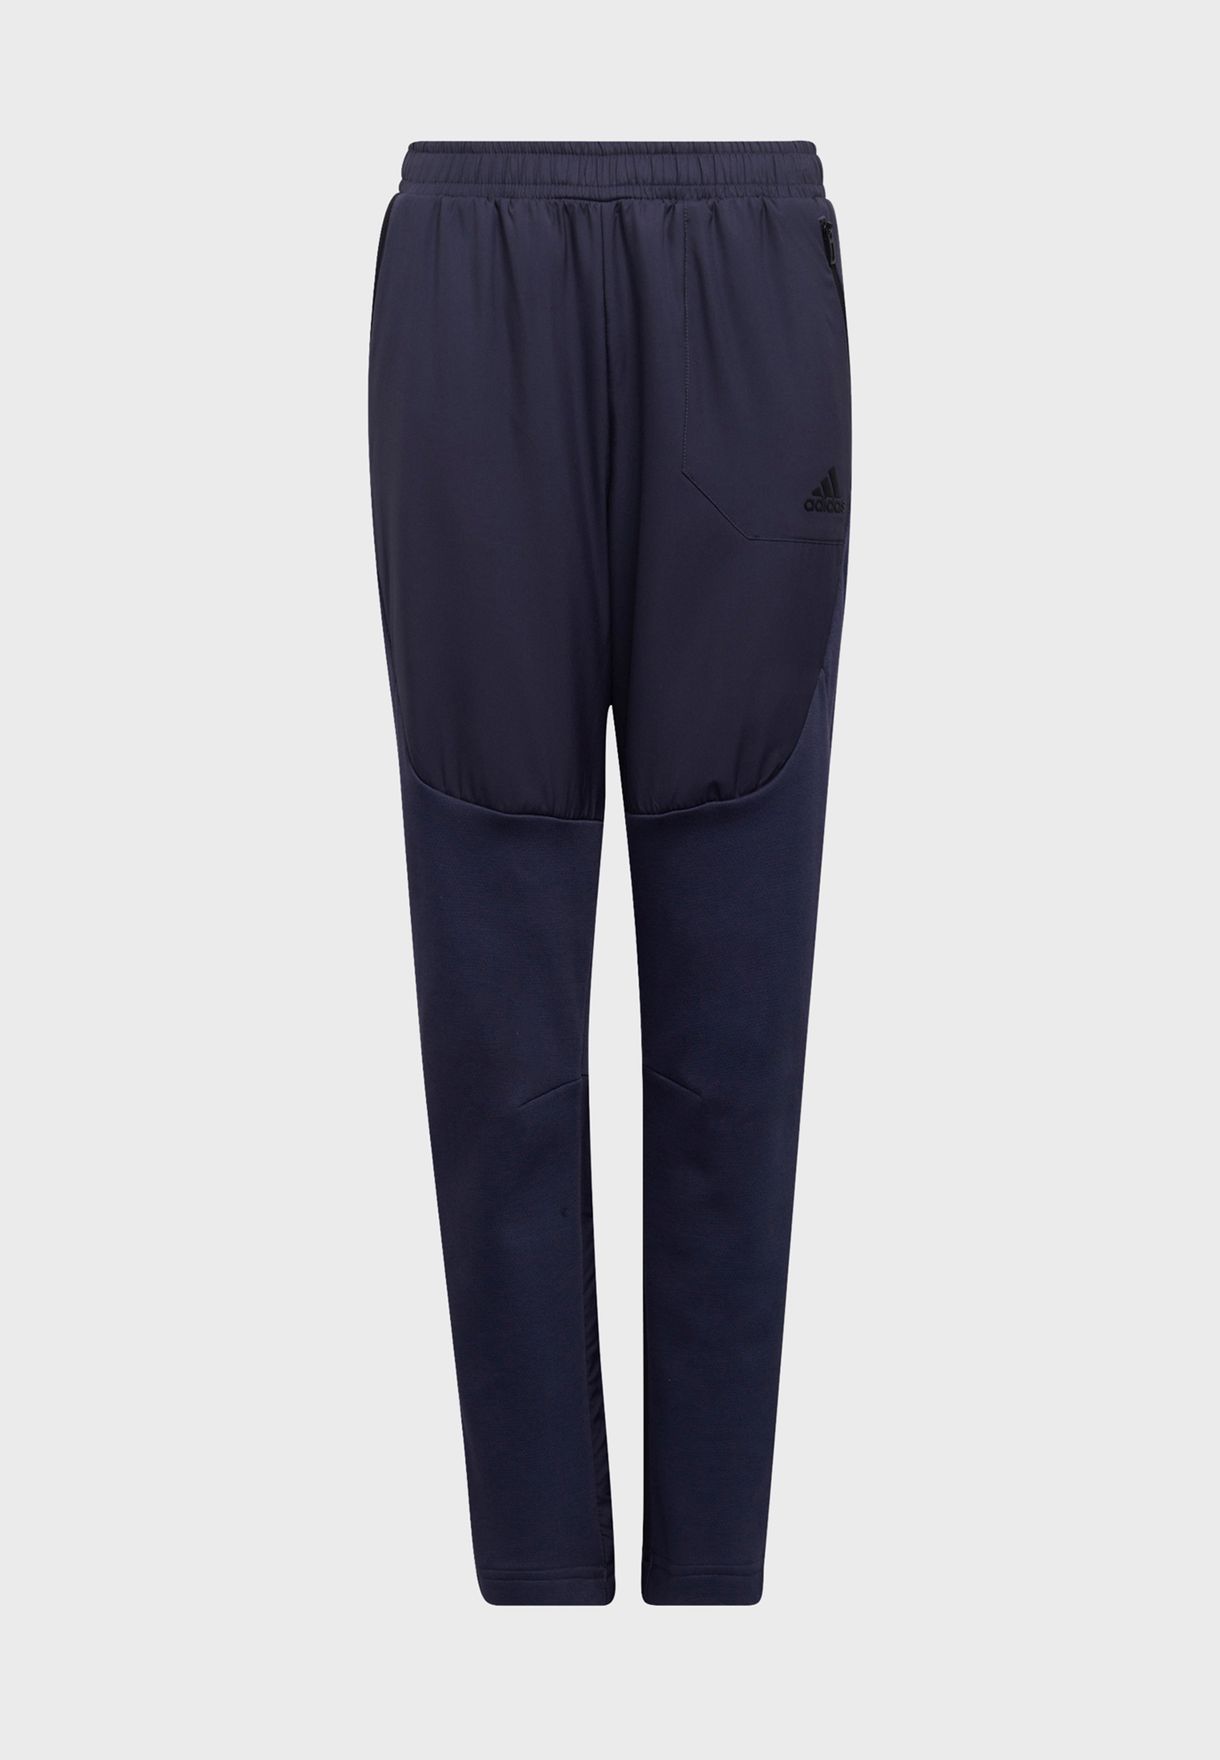 Youth Designed For Gameday Sweatpants